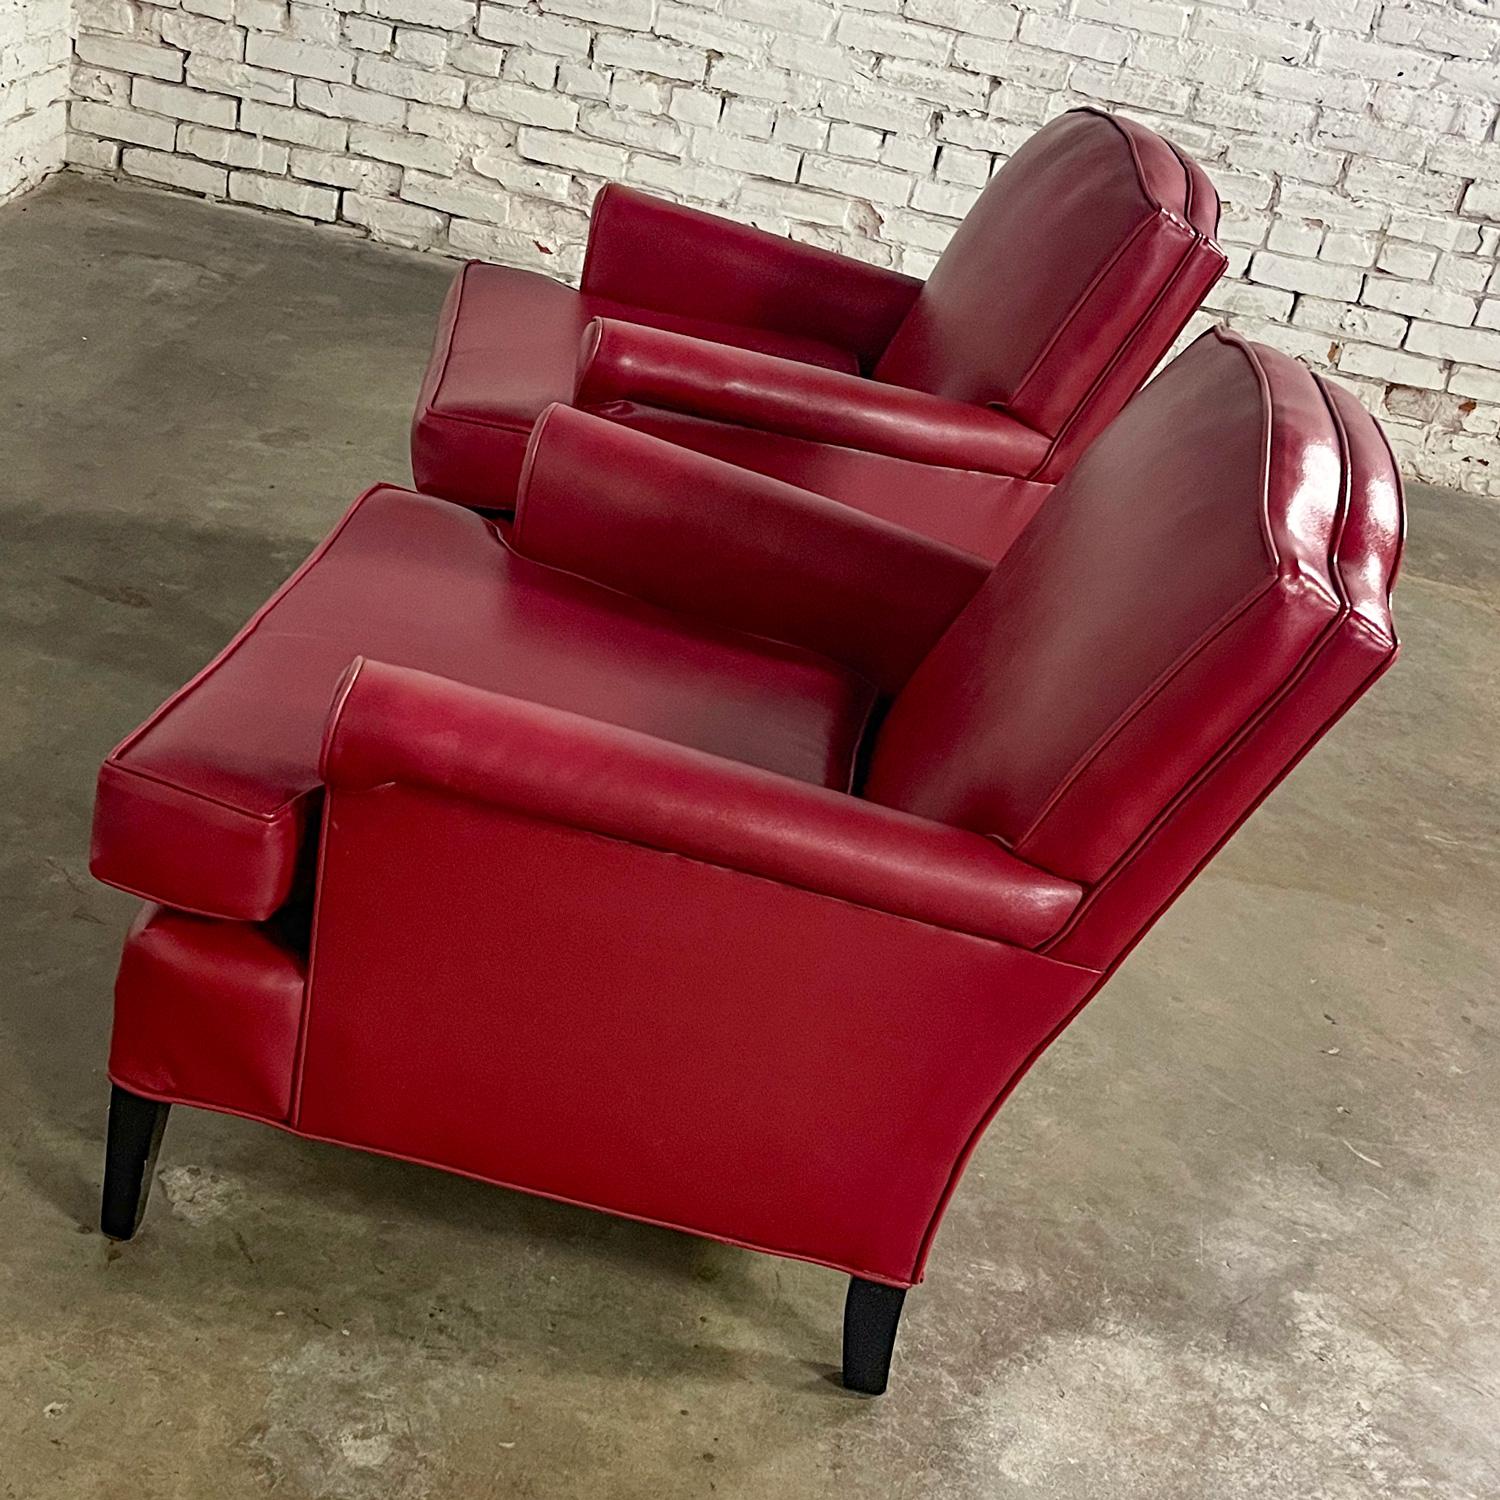 1940’s Traditional Club Chairs Original Red Faux Leather & Wood Legs a Pair In Good Condition For Sale In Topeka, KS